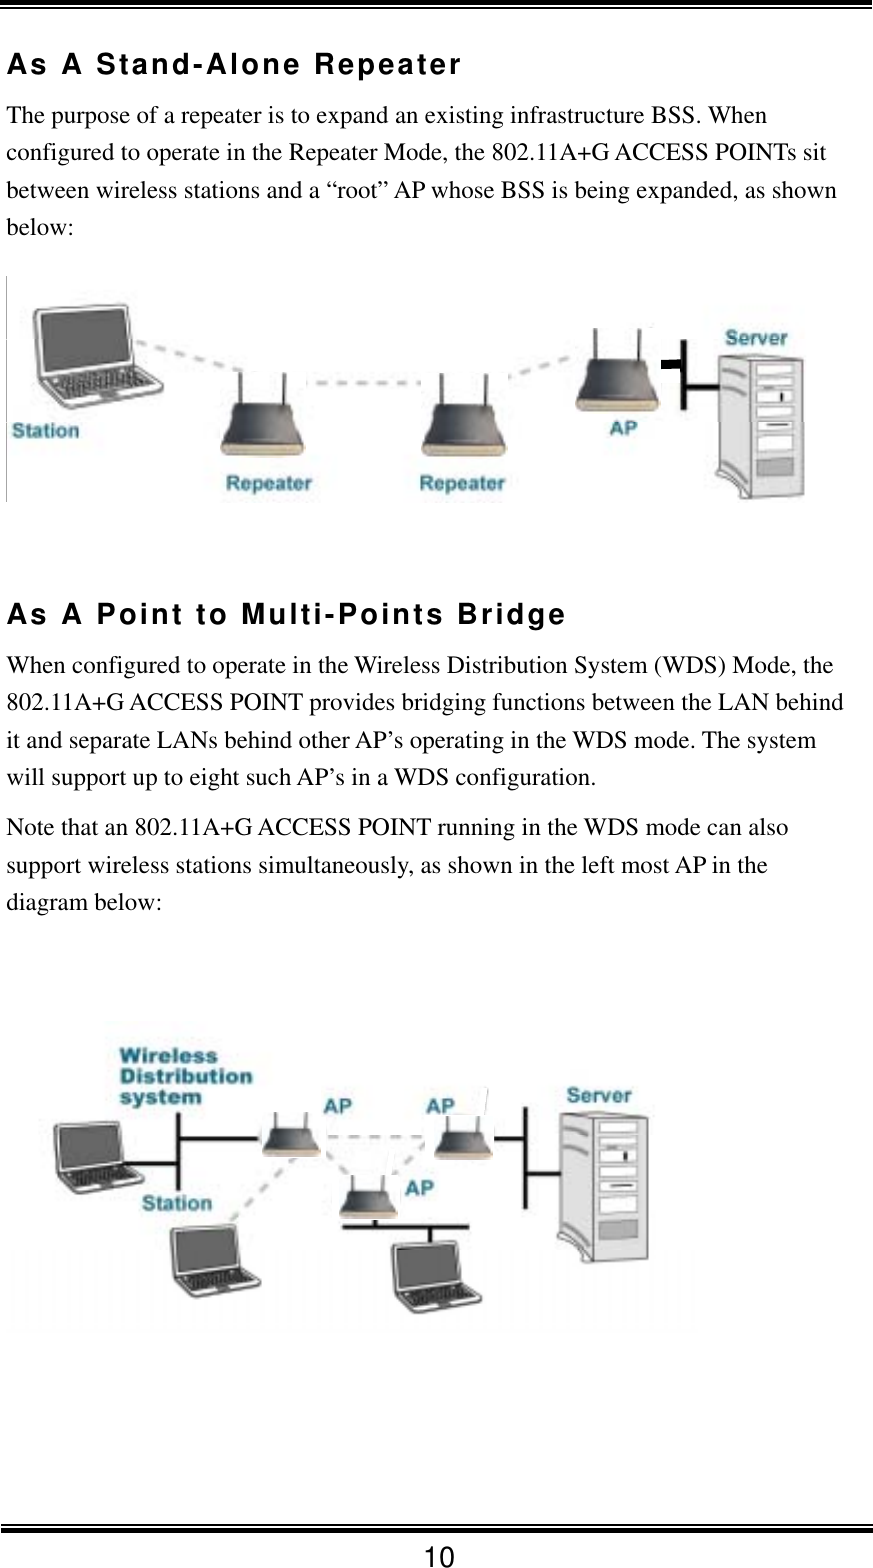  10 As A Stand-Alone Repeater   The purpose of a repeater is to expand an existing infrastructure BSS. When configured to operate in the Repeater Mode, the 802.11A+G ACCESS POINTs sit between wireless stations and a “root” AP whose BSS is being expanded, as shown below:   As A Point to Multi-Points Bridge When configured to operate in the Wireless Distribution System (WDS) Mode, the 802.11A+G ACCESS POINT provides bridging functions between the LAN behind it and separate LANs behind other AP’s operating in the WDS mode. The system will support up to eight such AP’s in a WDS configuration. Note that an 802.11A+G ACCESS POINT running in the WDS mode can also support wireless stations simultaneously, as shown in the left most AP in the diagram below:      